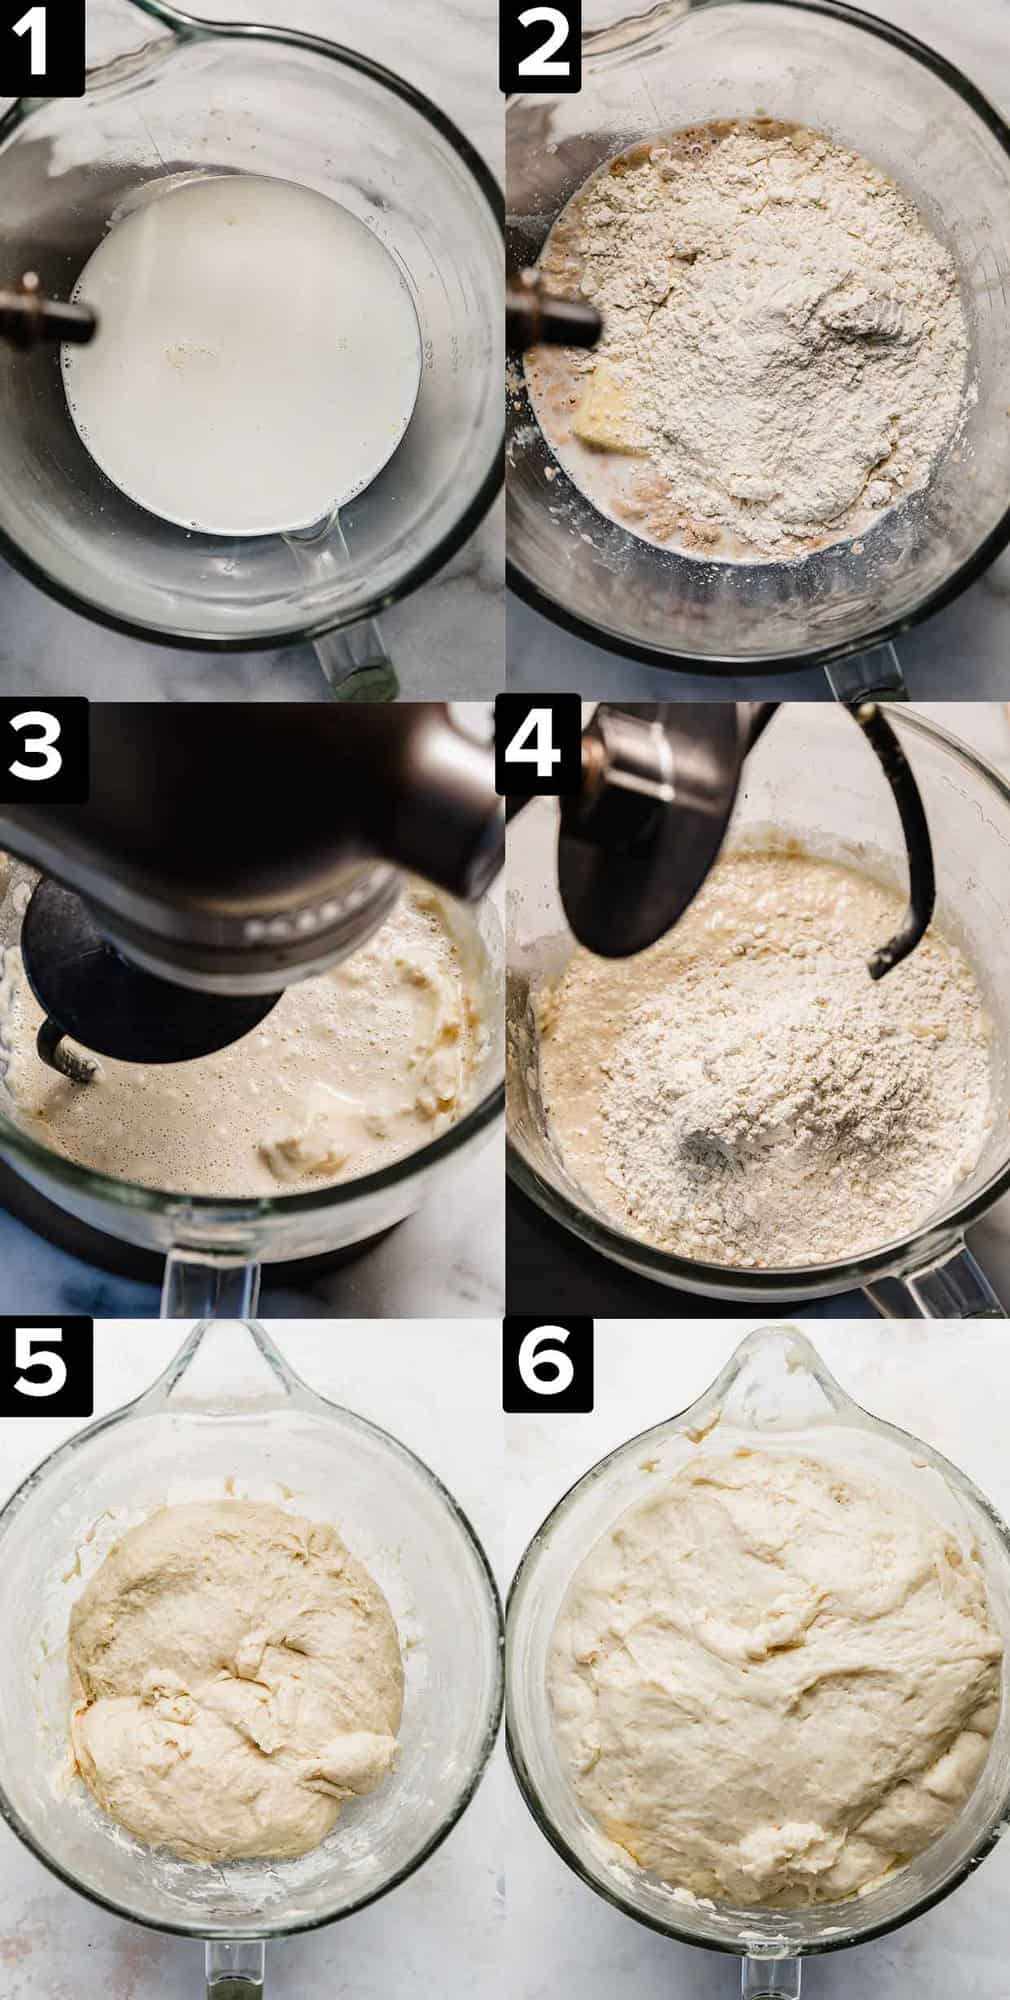 Six photos showing how to make Lion House Rolls dough in a glass stand mixer bowl.